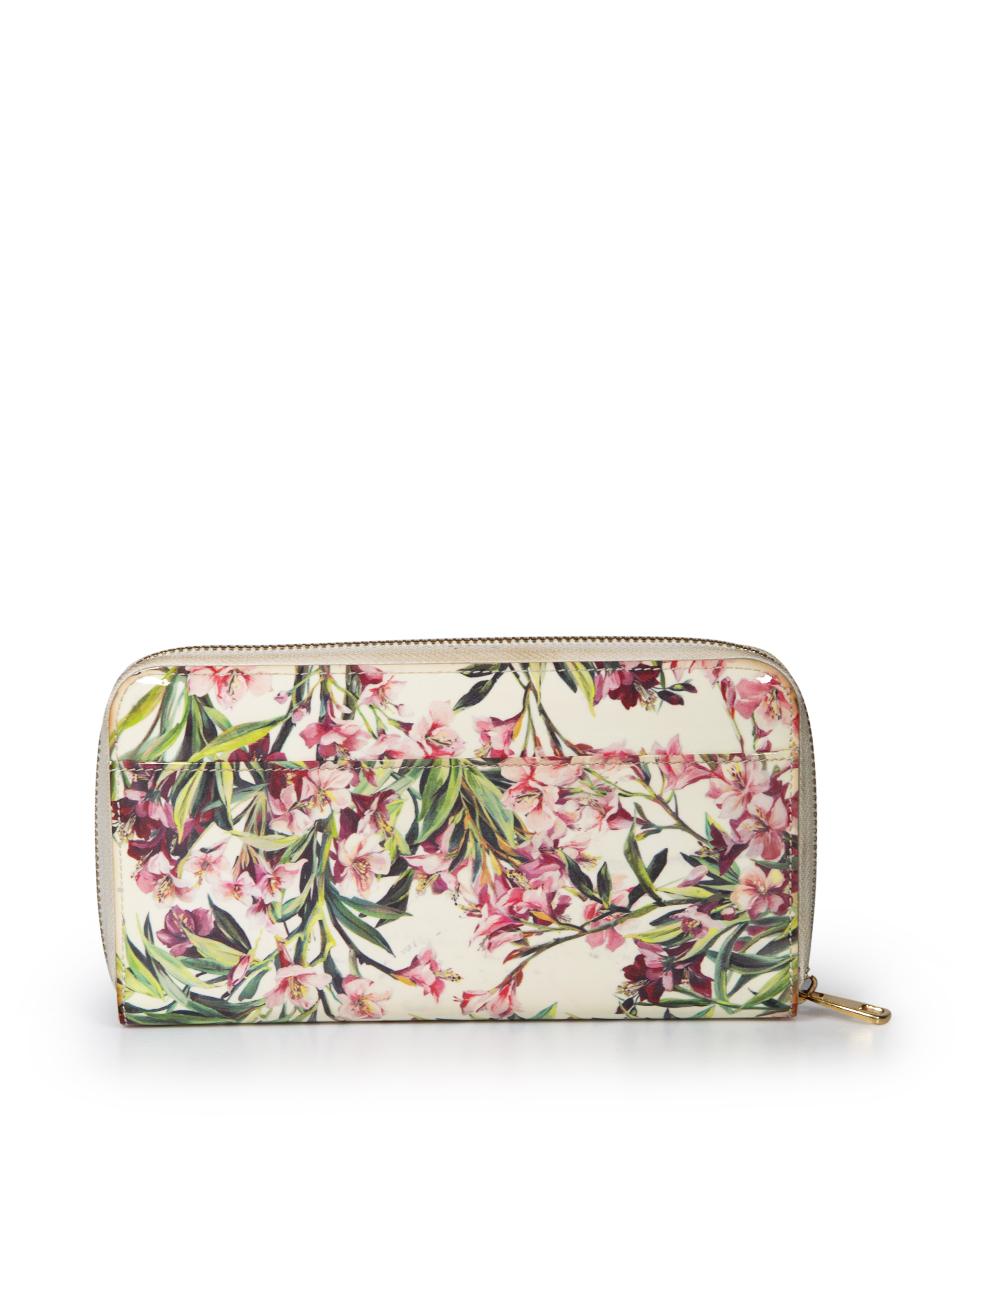 Dolce & Gabbana Floral Print Patent Zip Wallet In Good Condition For Sale In London, GB